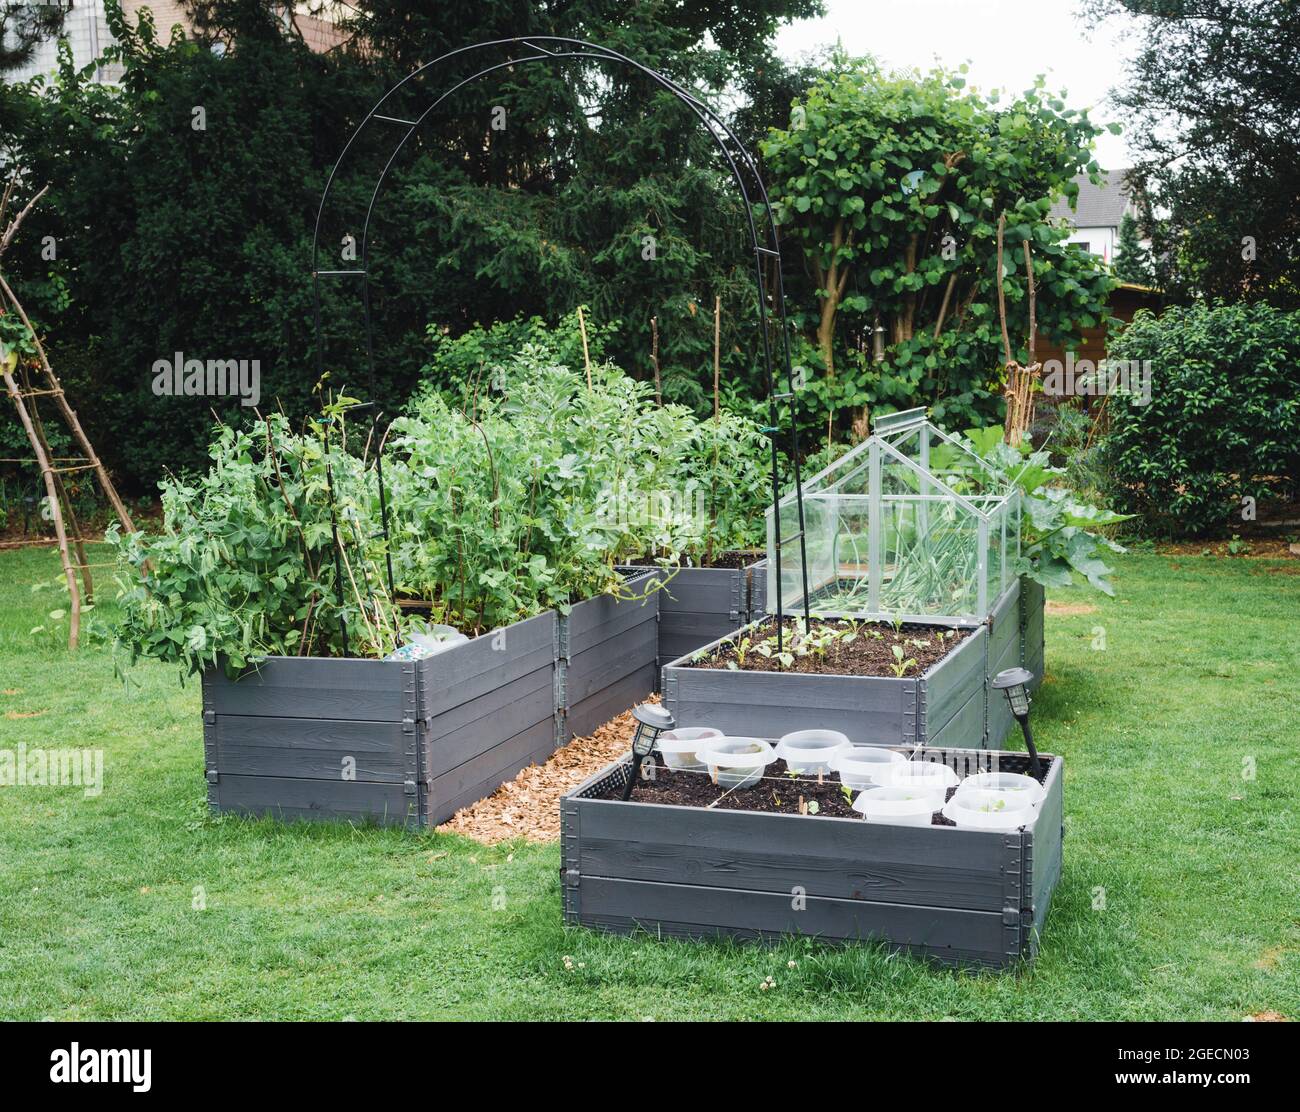 Raised beds in the garden Stock Photo